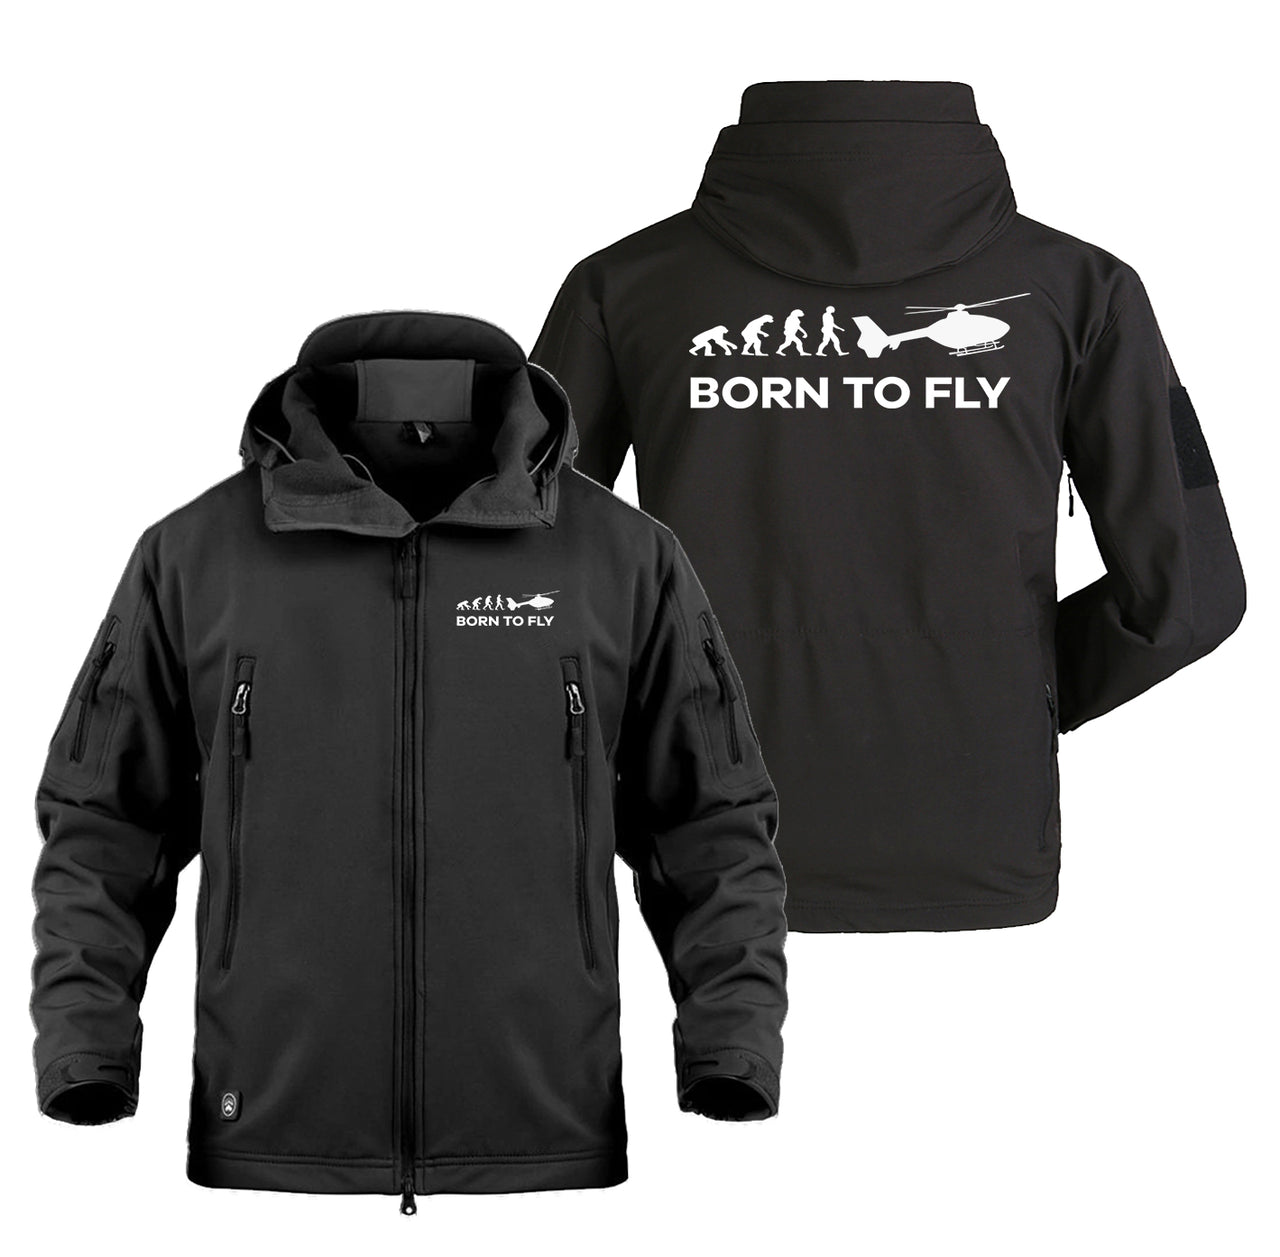 Born To Fly Helicopter Designed Military Jackets (Customizable)